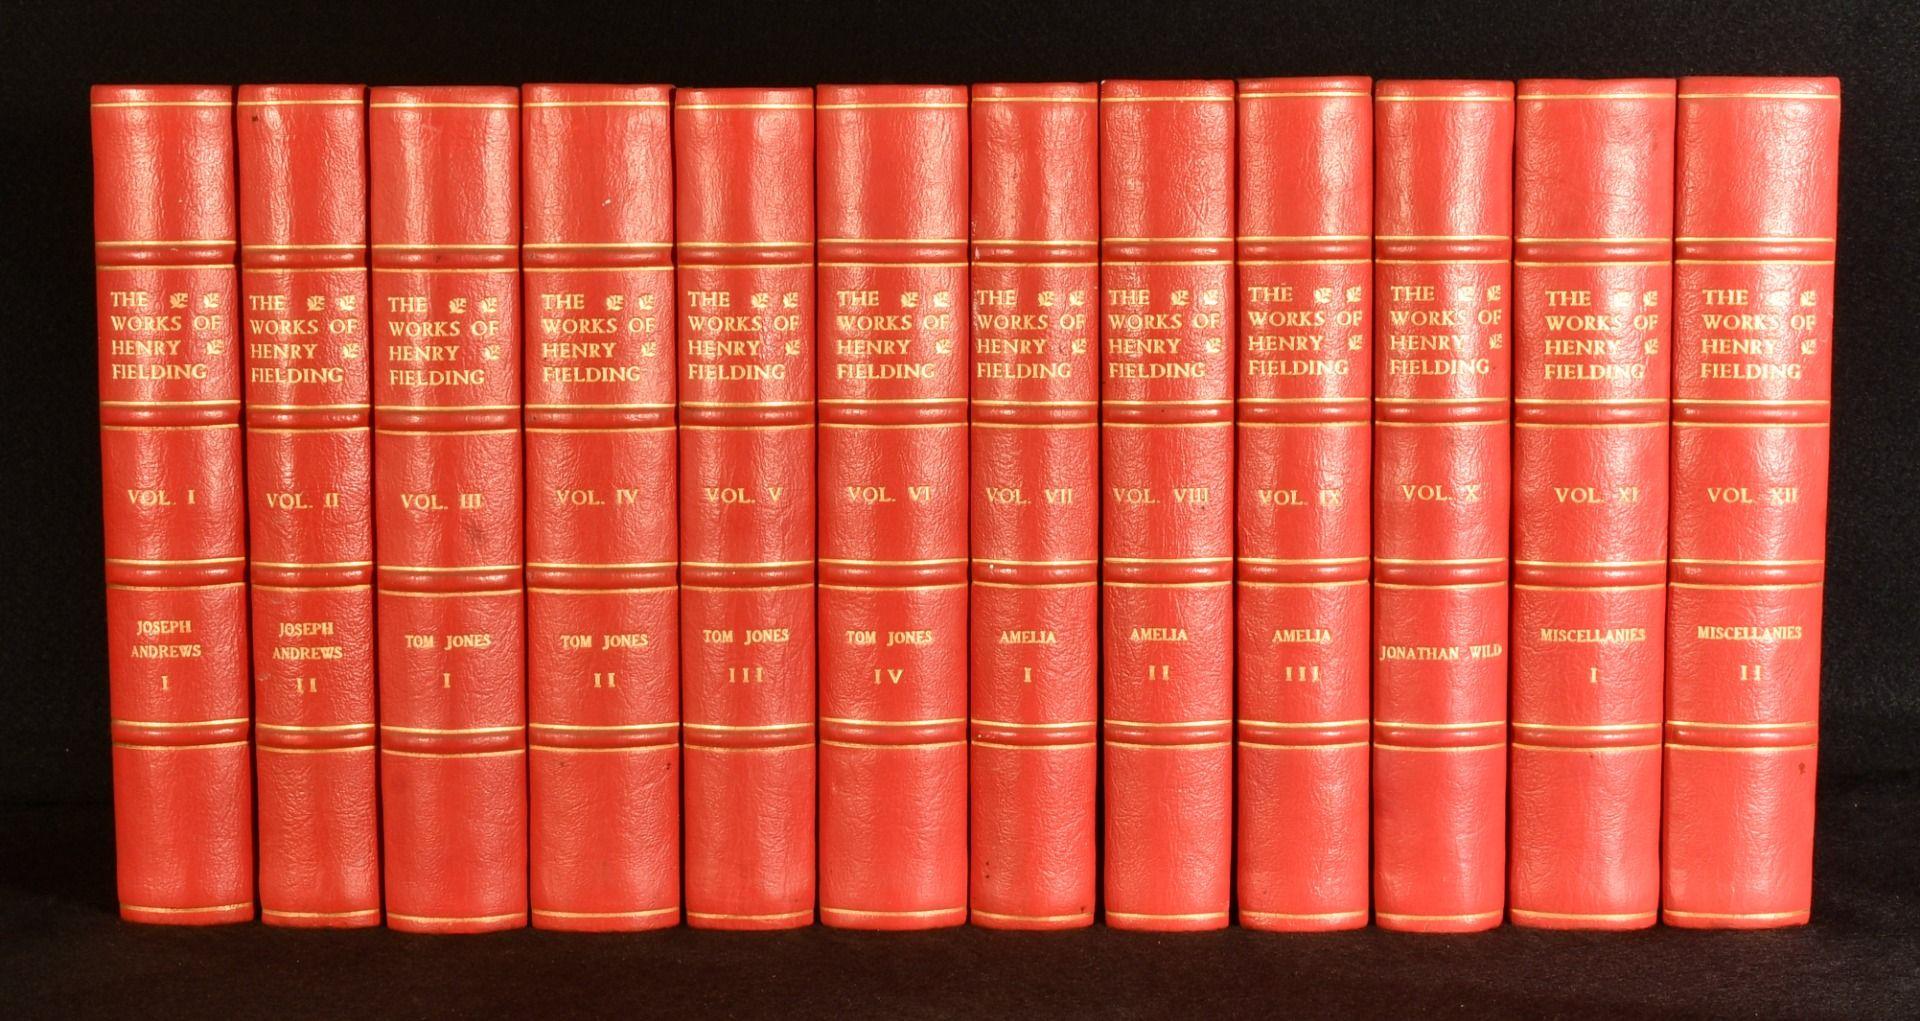 A beautifully bound, limited edition of this complete set of twelve collected works of Henry Fielding, with an introduction by Edmund Gosse.

A Limited Edition set, one of only seven-hundred-and-fifty copies published.

Wonderfully bound in red half